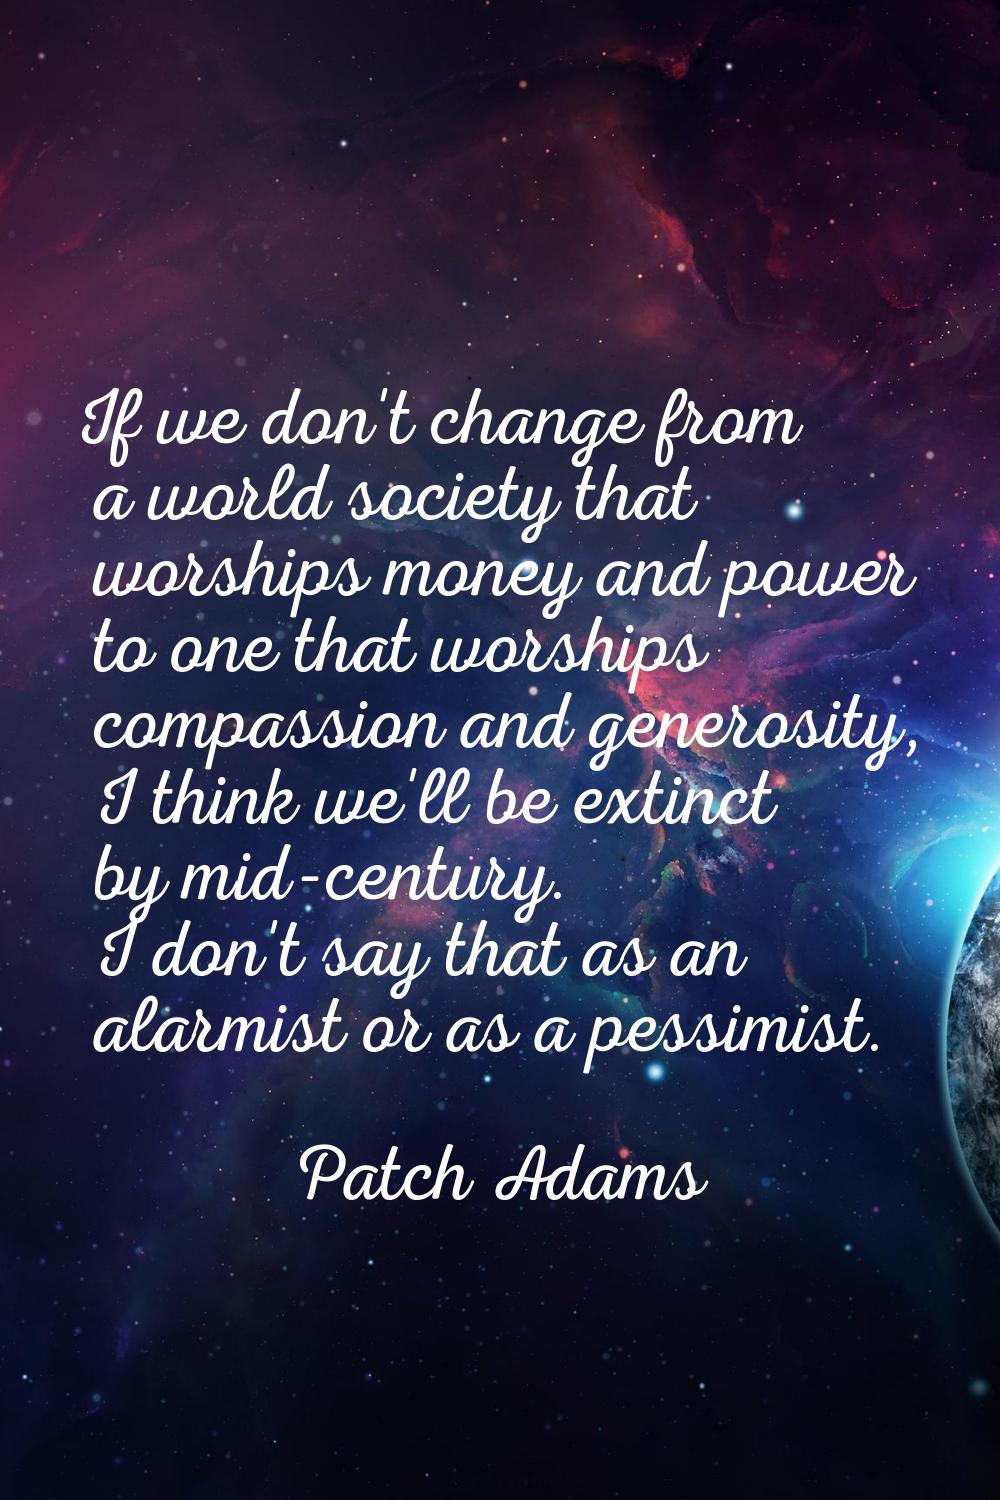 If we don't change from a world society that worships money and power to one that worships compassi